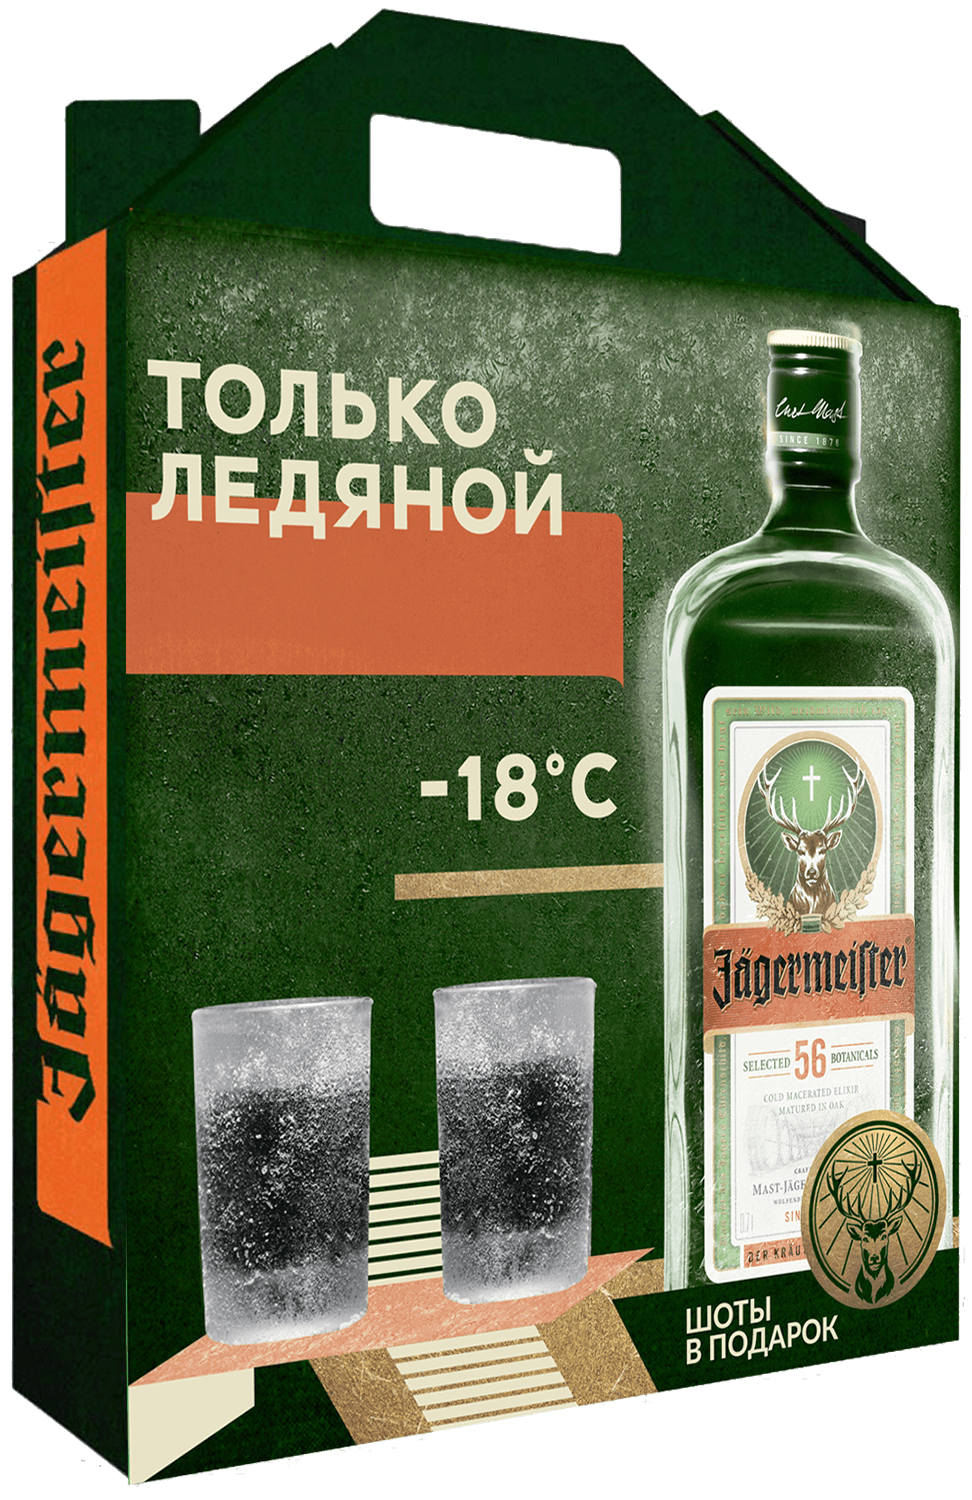 Jagermeister (gift box with two shots)